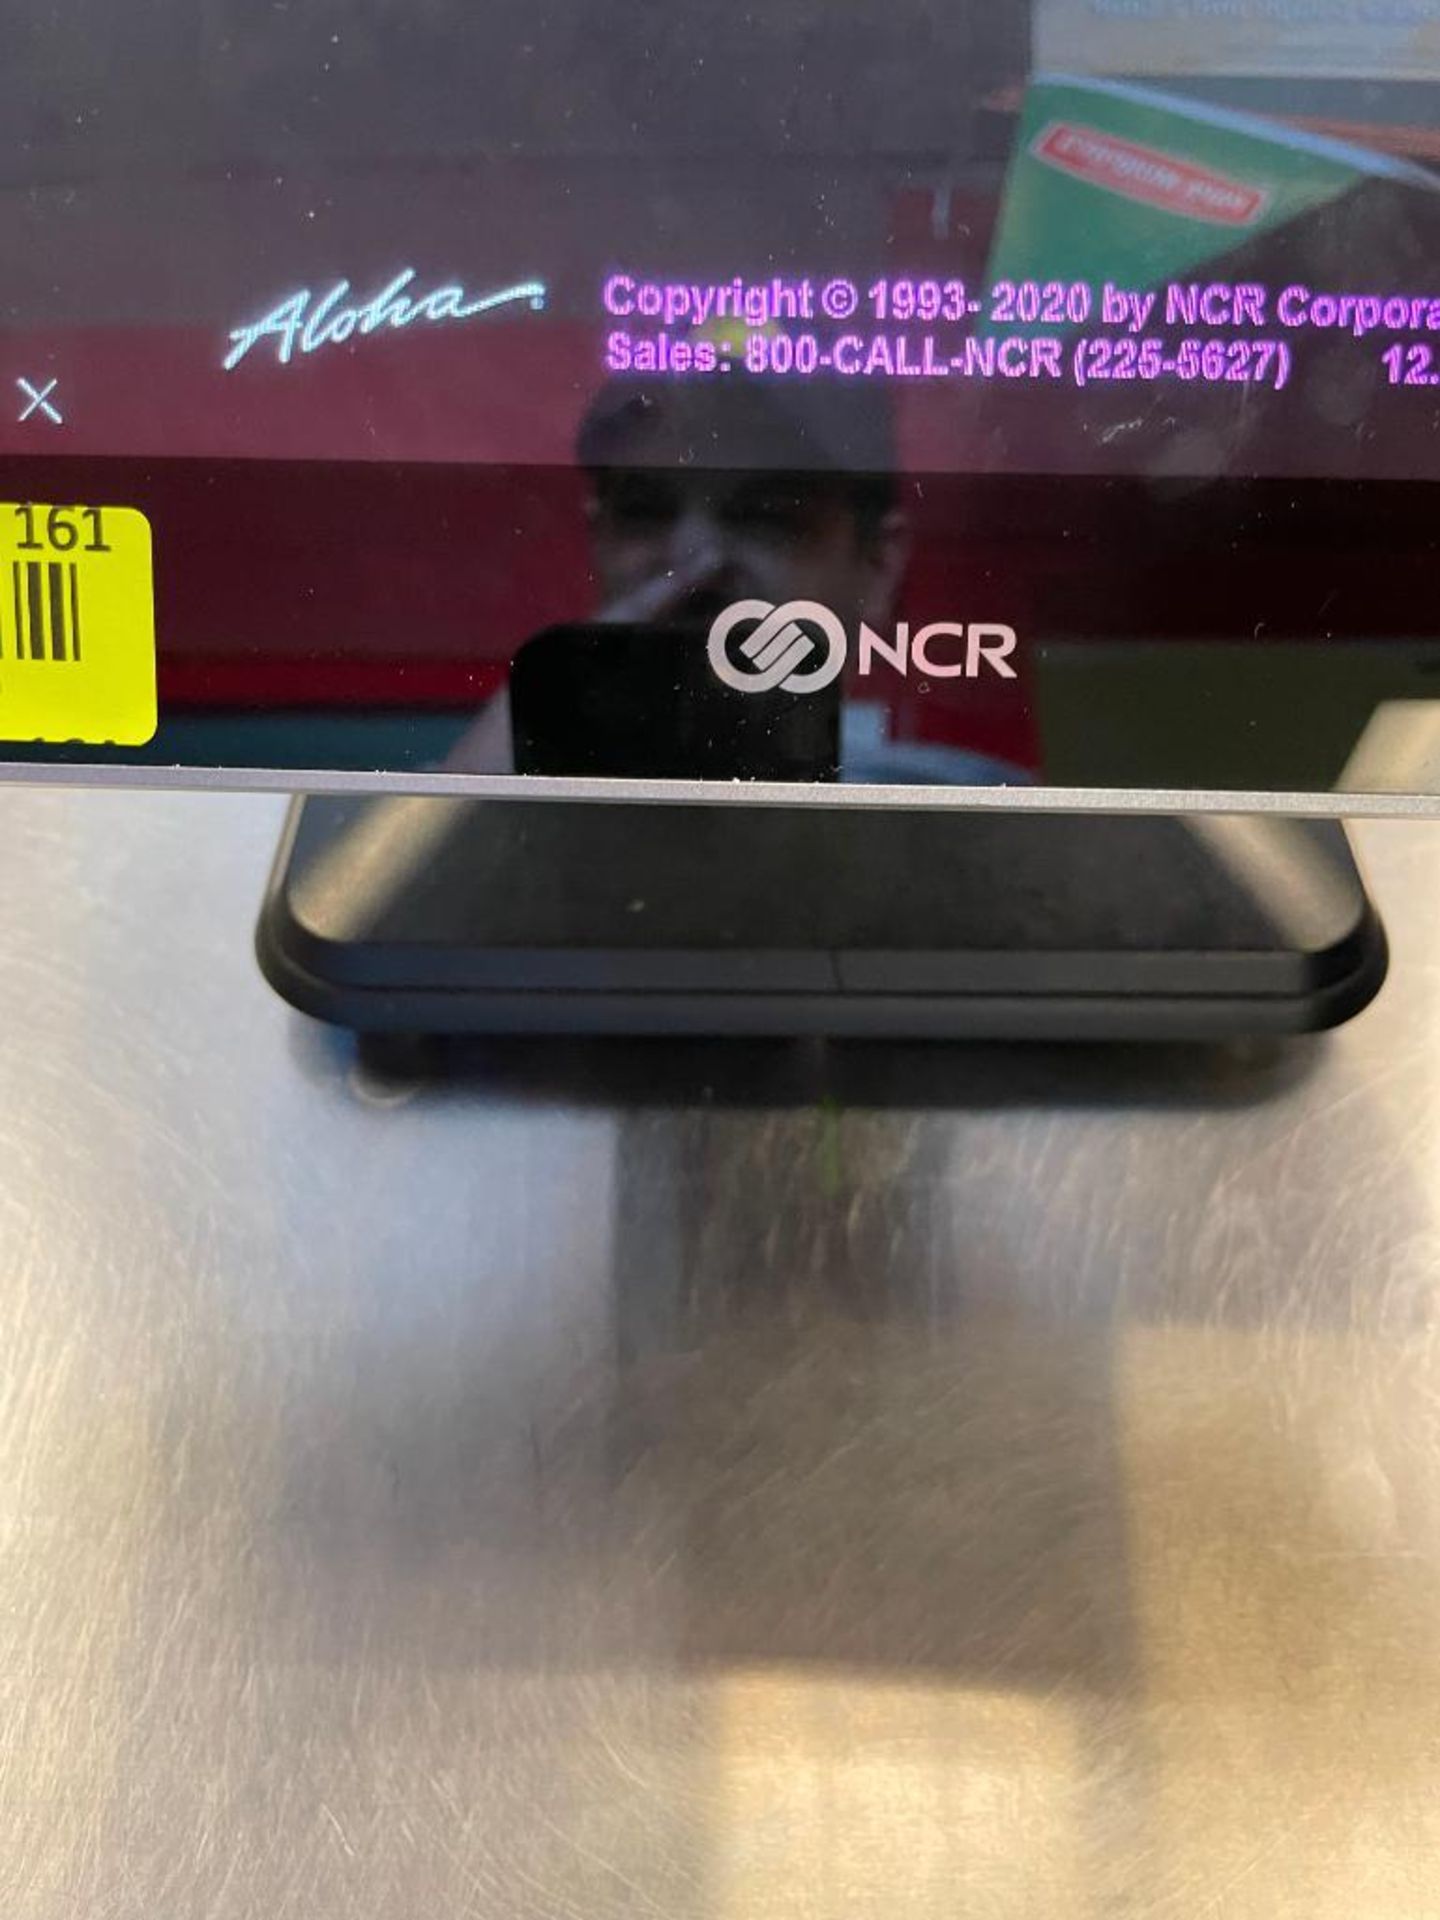 DESCRIPTION: NCR TOUCH SCREEN POS SYSTEM WITH (3) TERMINALS LOCATION: 901 FM 544 SUITE 200 WYLIE, TX - Image 2 of 4